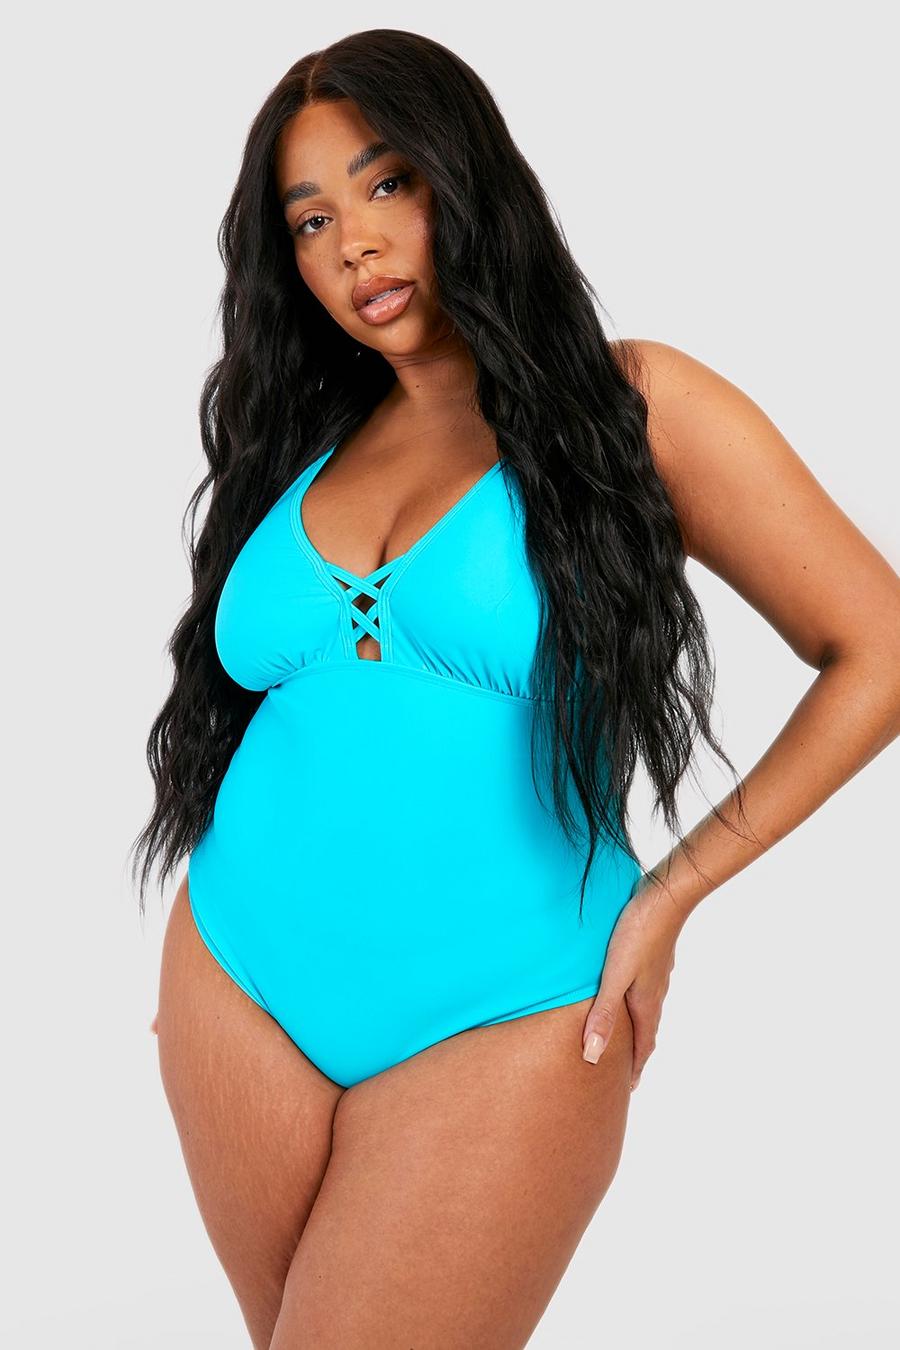 at styre partiskhed At opdage Women's Plus Lace Up Tummy Control Swimsuit | Boohoo UK